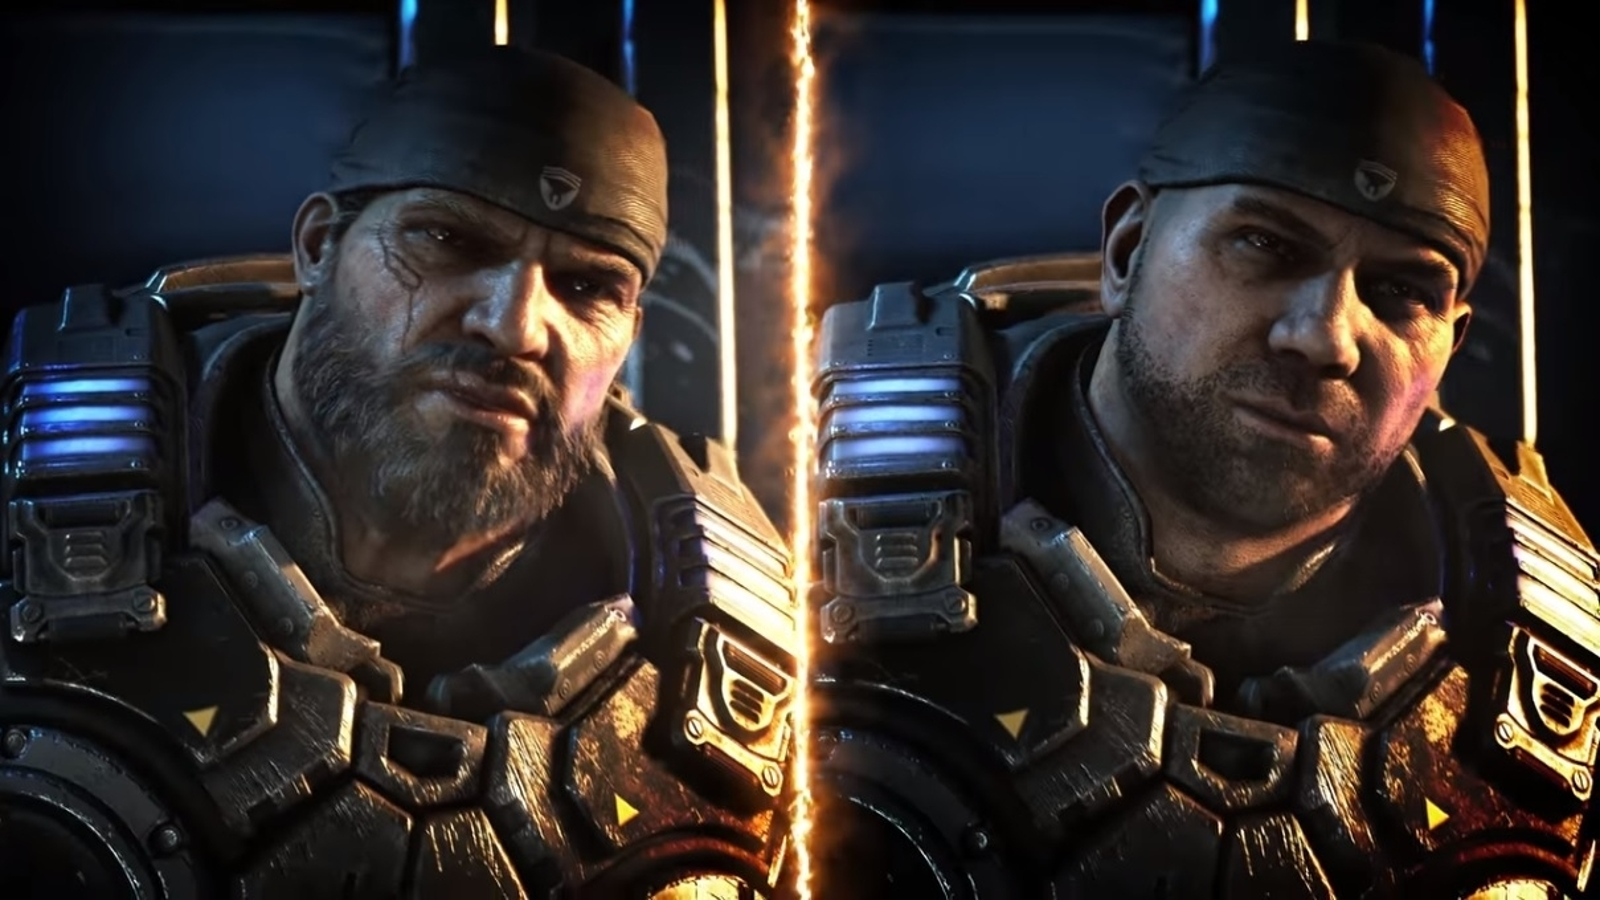 Gears 5 Cross-Play To Support Most Campaign and Multiplayer Modes